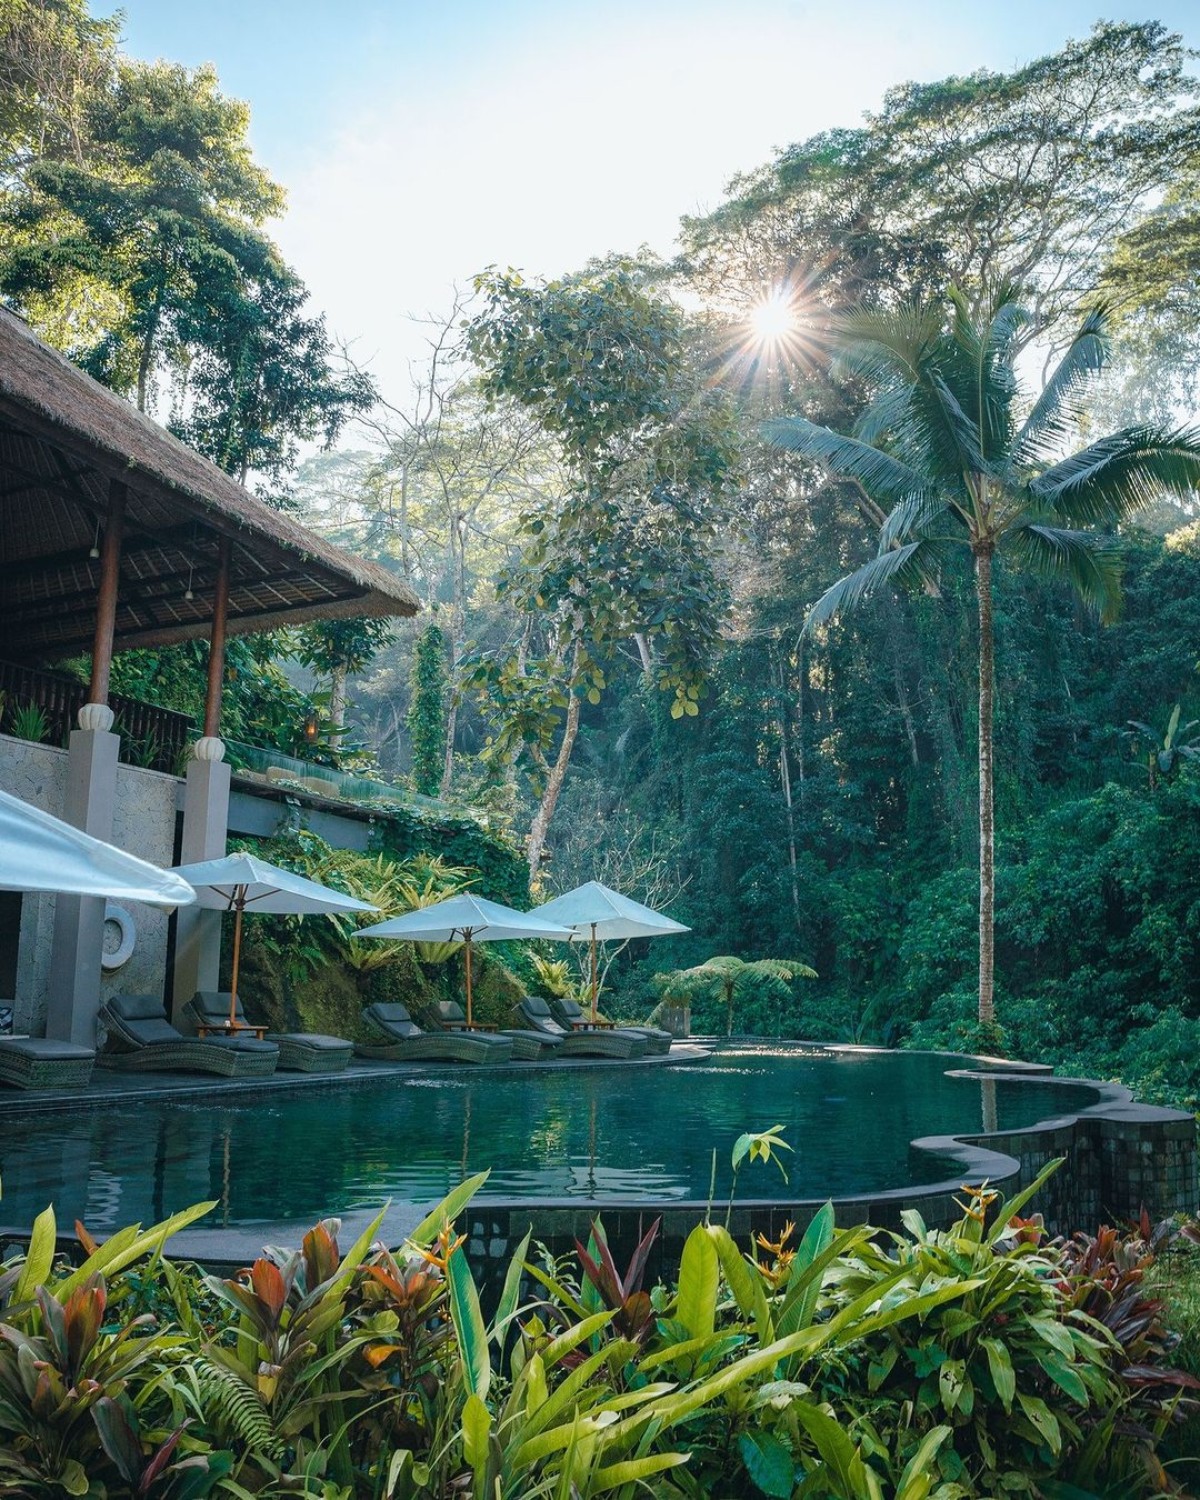 A tranquil pool setting with sunlight filtering through trees, and lounge chairs under umbrellas by the water in Ubud, Bali.